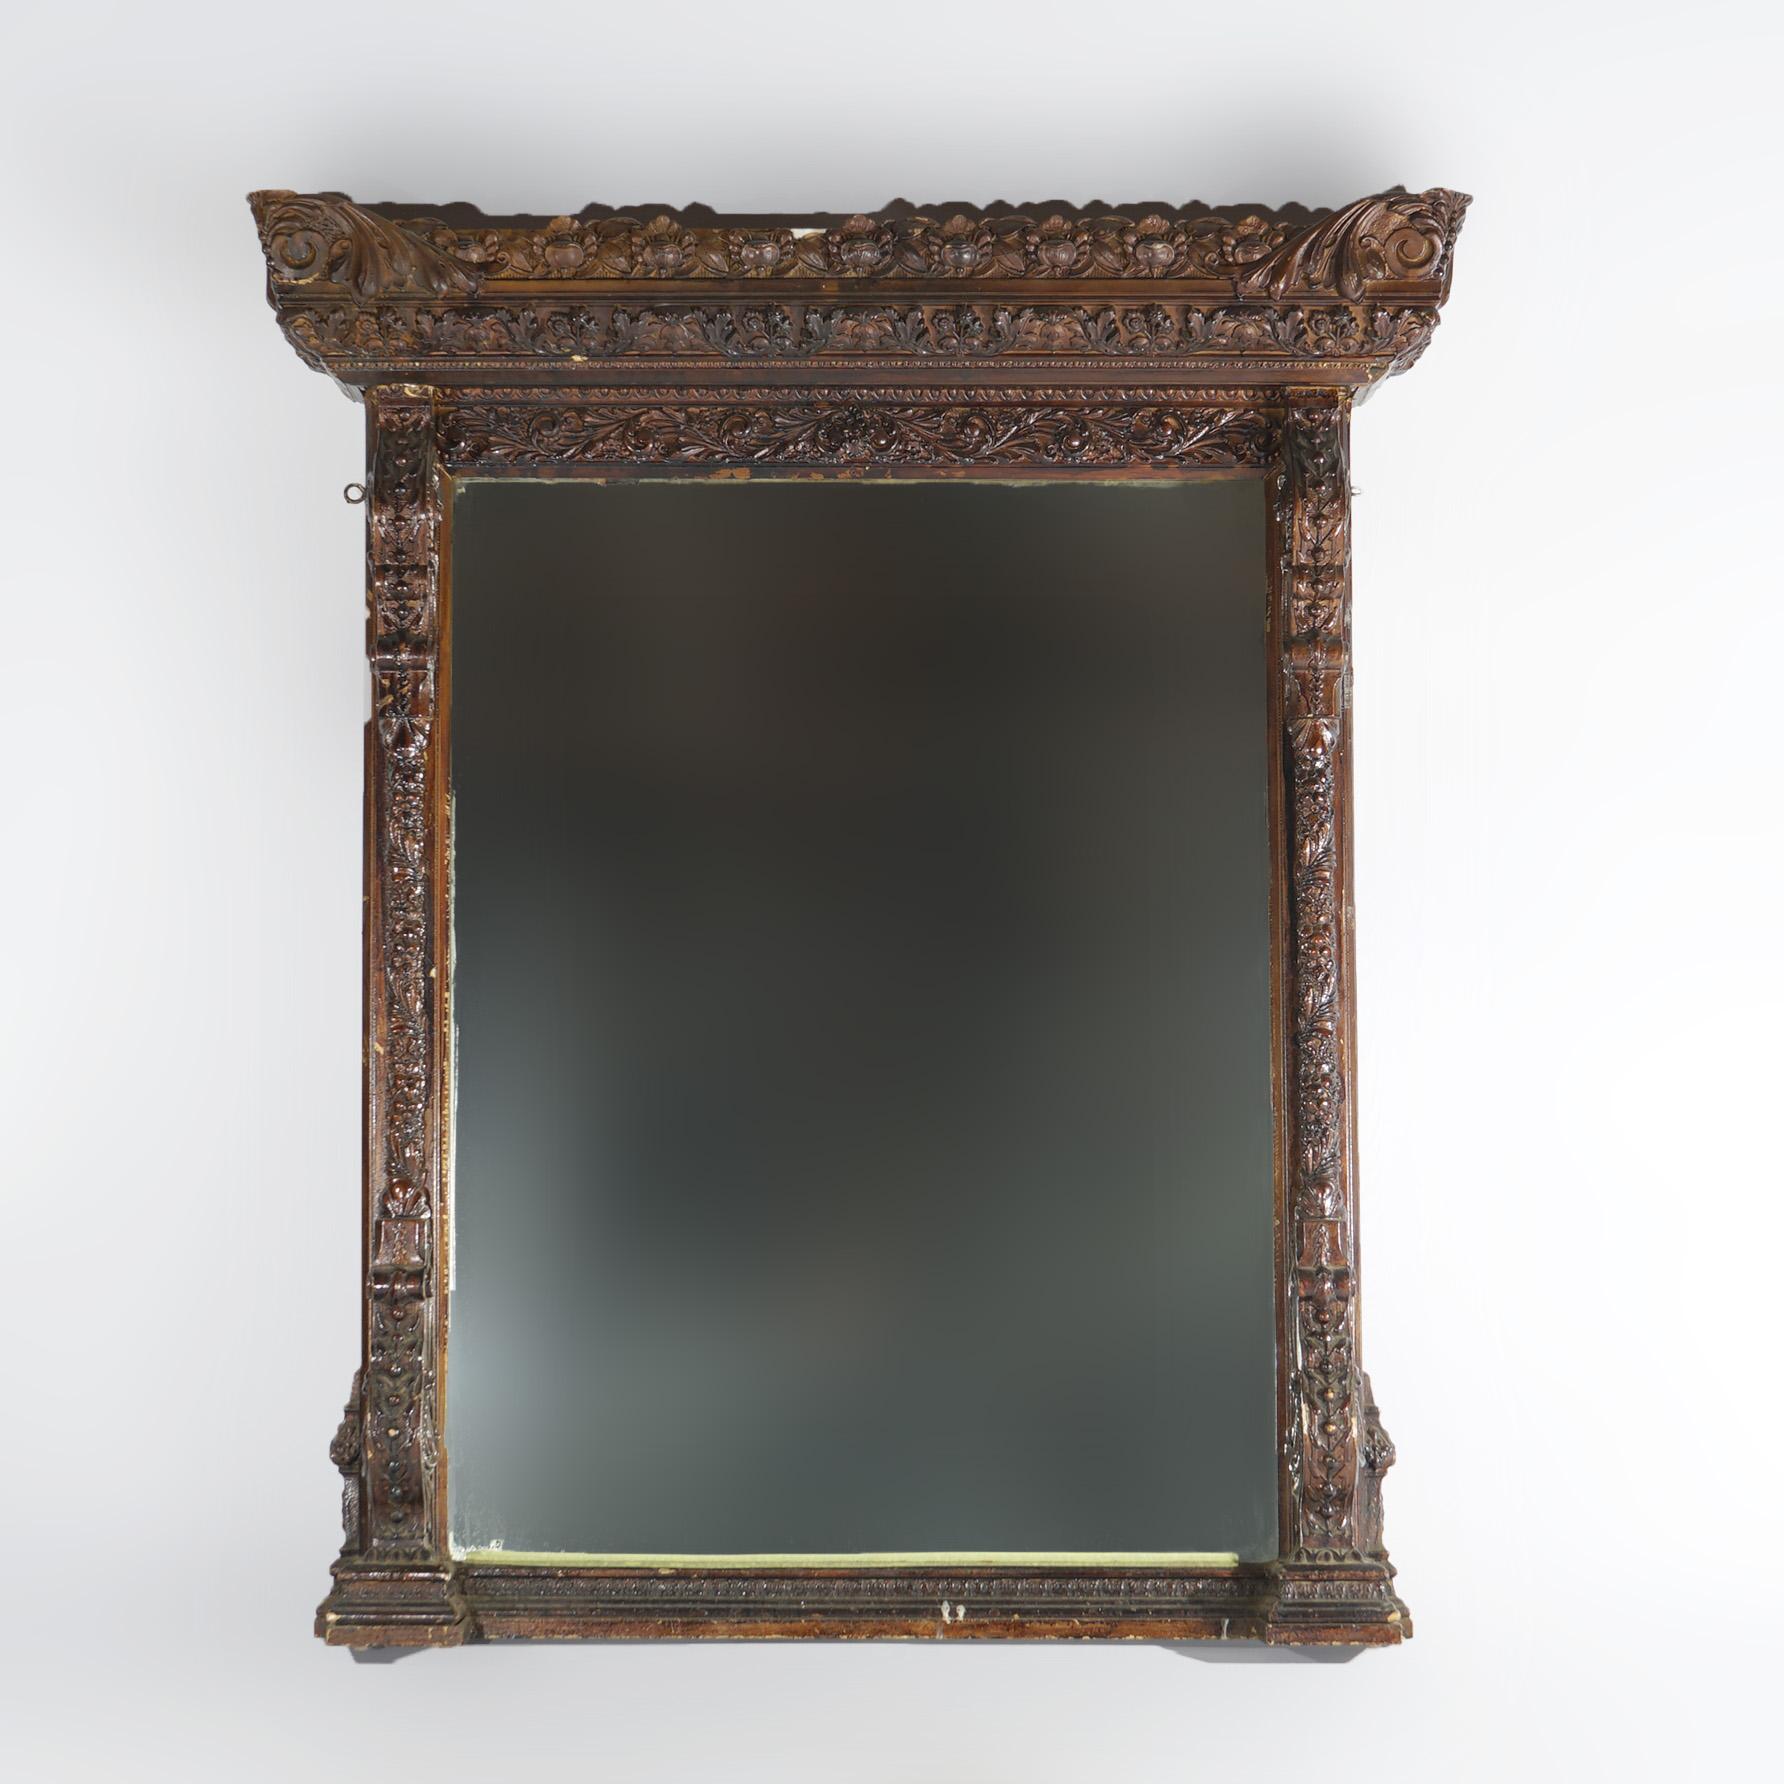 An antique Renaissance Revival over mantel mirror offers carved wood and gesso frame having foliate, fruit, nut, and scroll elements, 19th century

Measure - 60